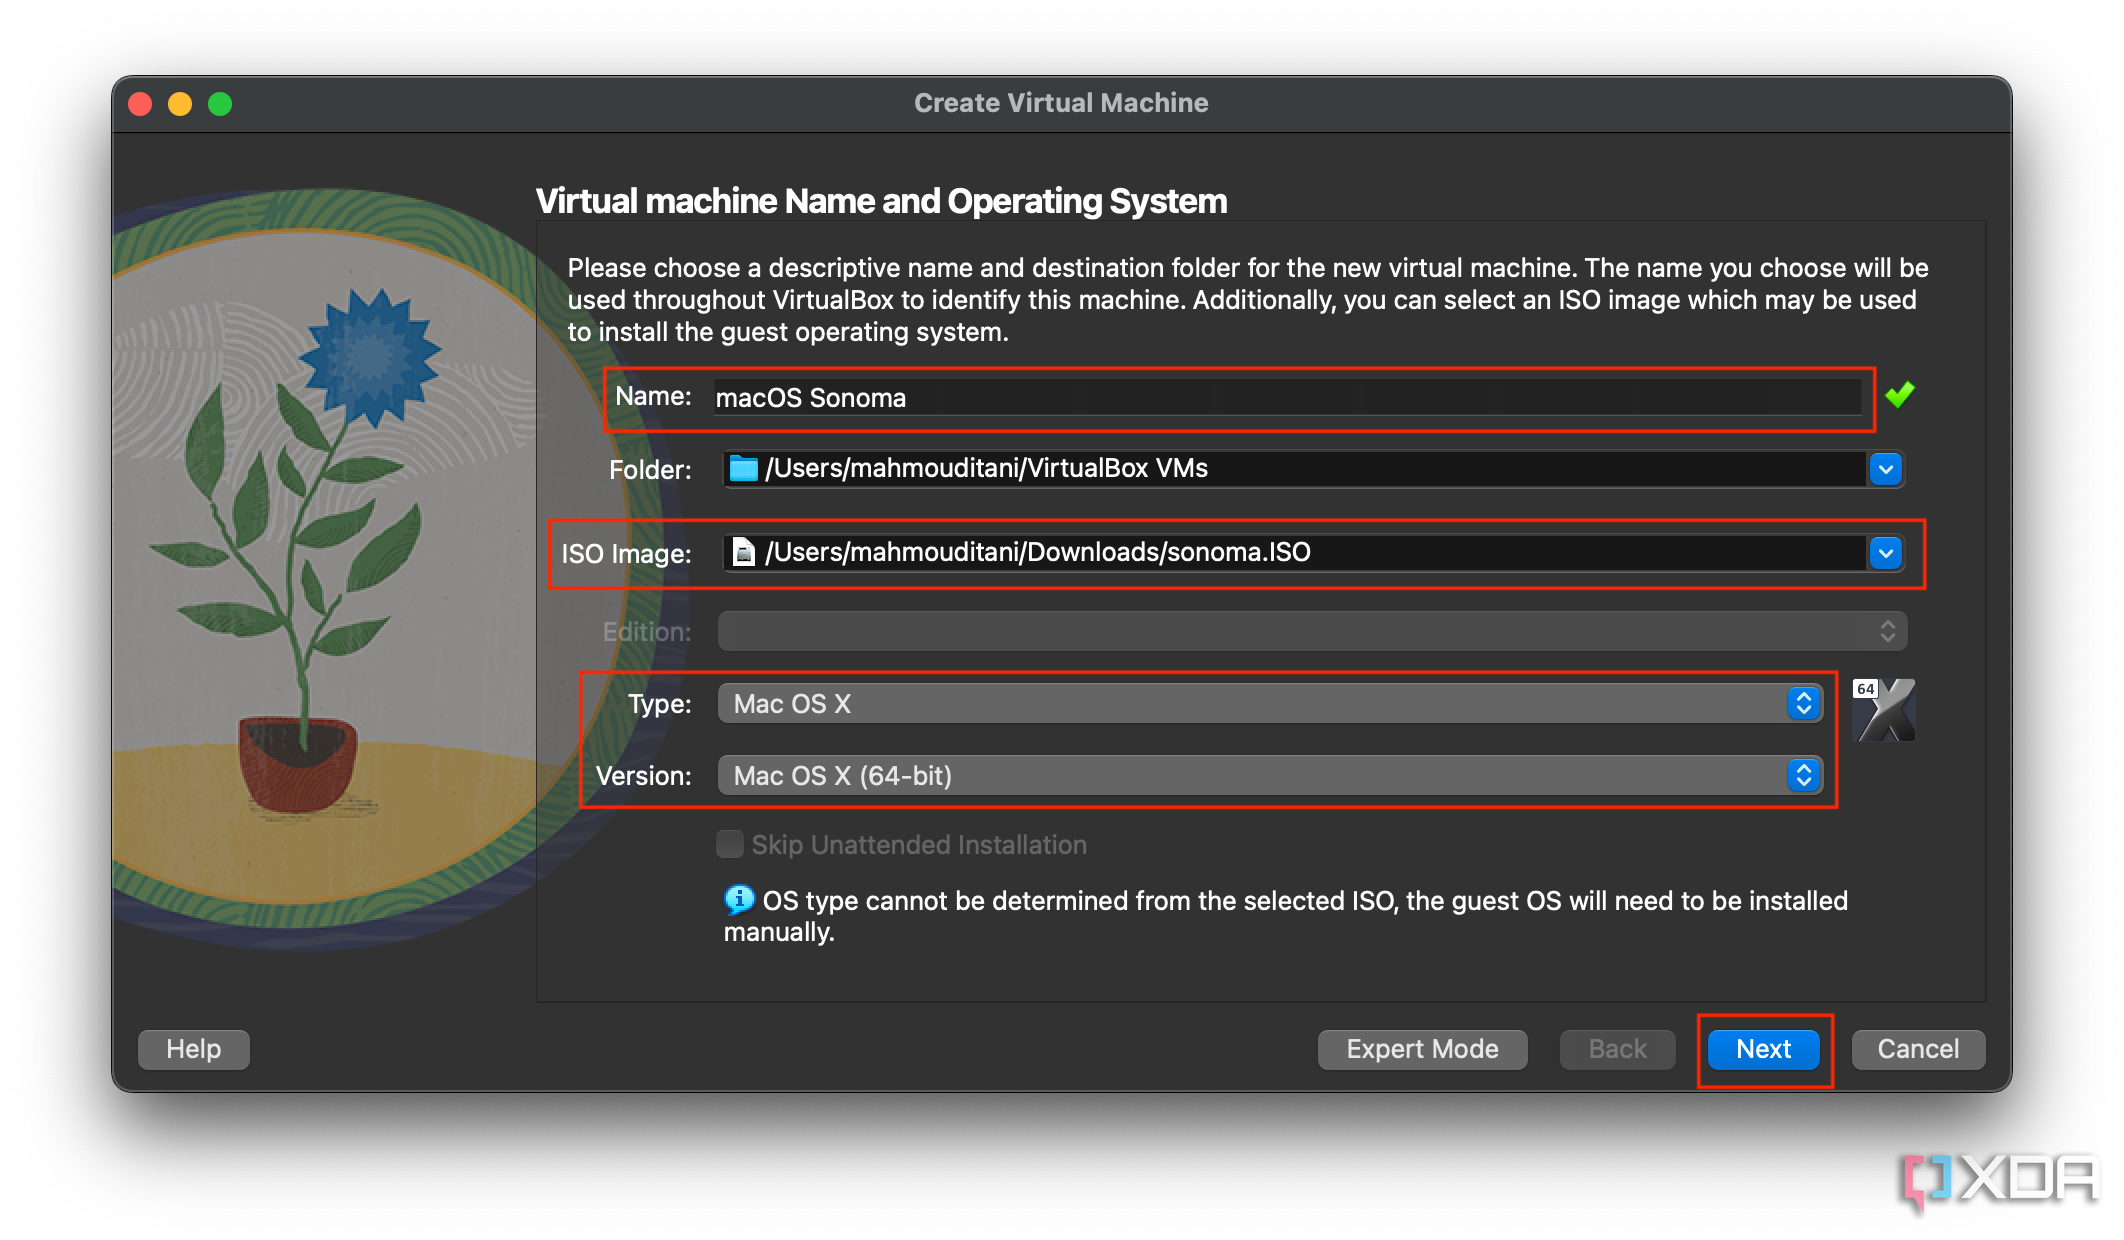 filling in the required field to create a new virtual machine